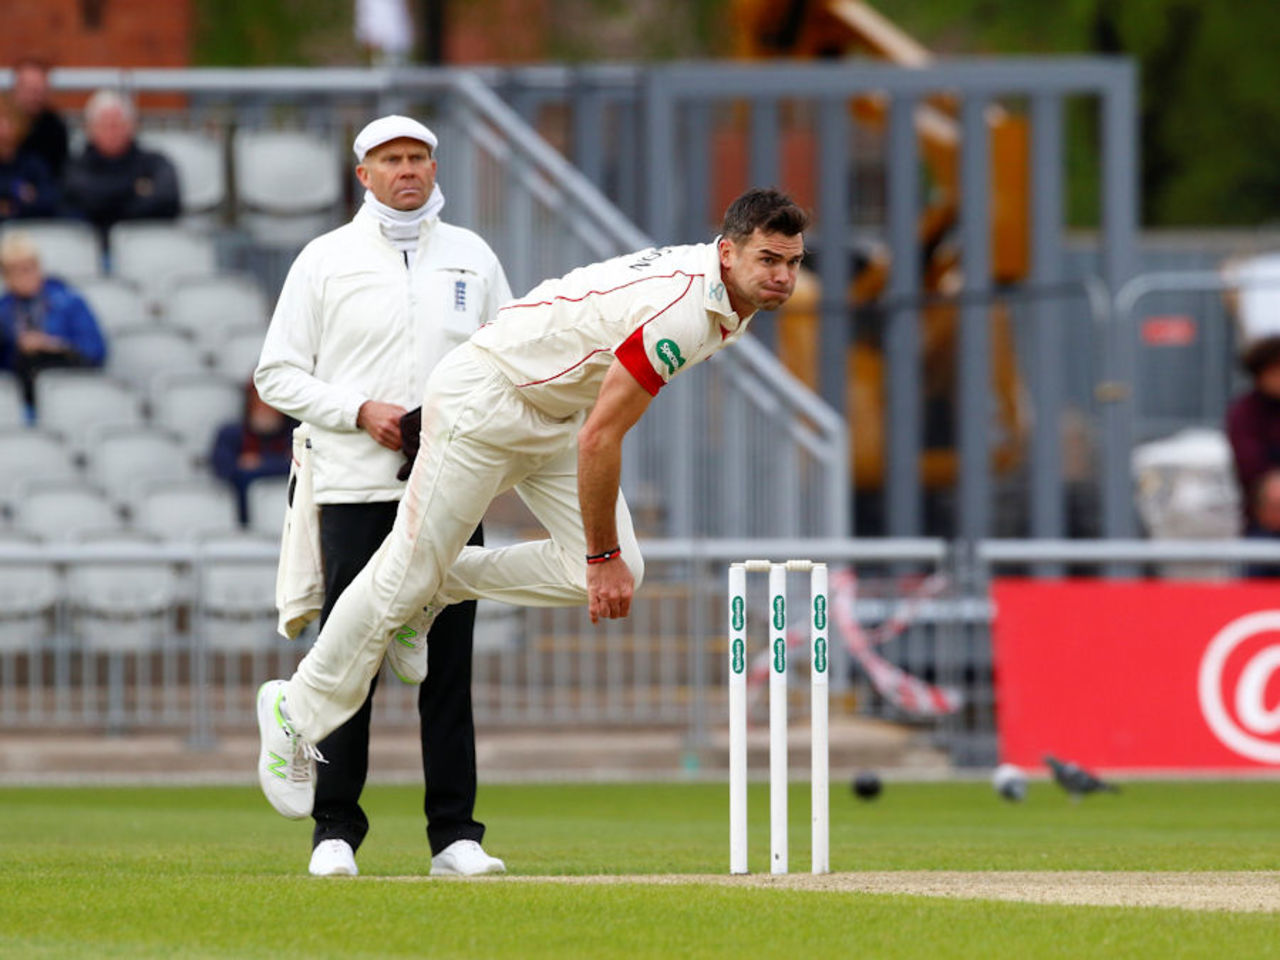 James Anderson relishes a rare appearance for Lancashire, Lancashire v Somerset, Specsavers Championship Division One, April 21, 2017